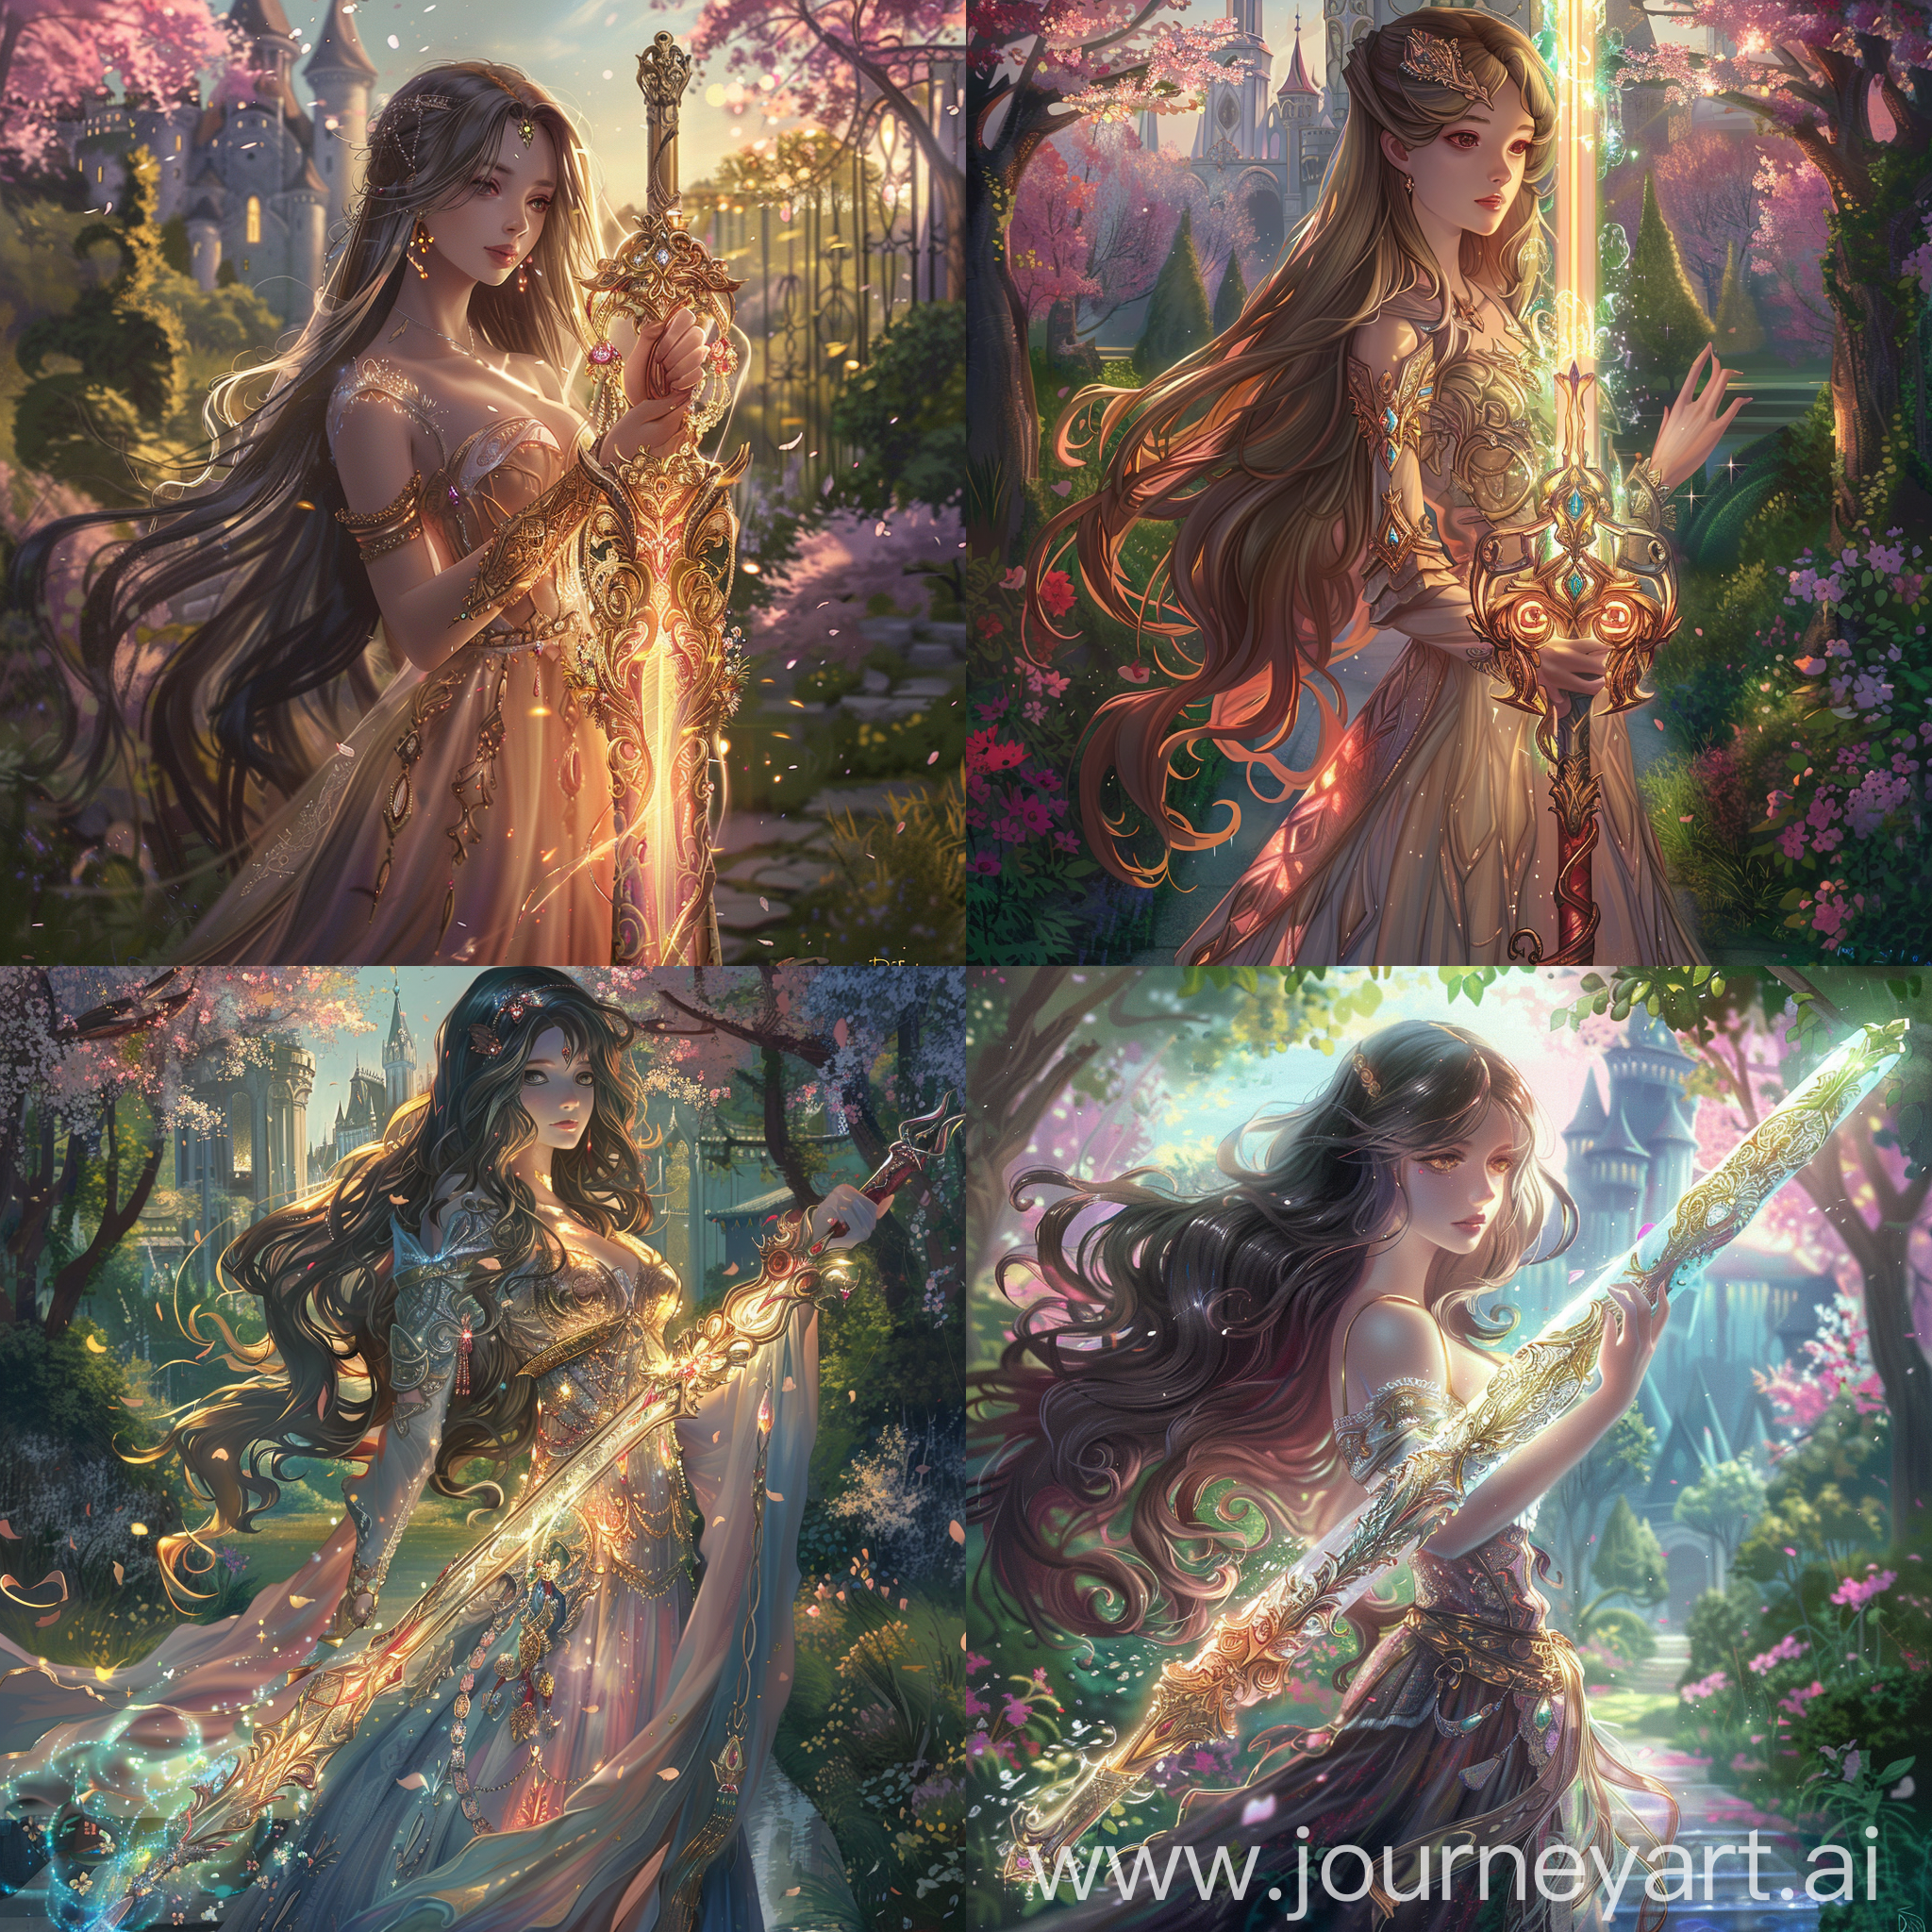 A beautiful anime princess with long flowing hair and an elegant dress, holding an ornate magical sword that glows with ethereal light. The sword has intricate engravings and a jeweled hilt. She stands confidently in a lush fantasy garden with cherry blossom trees and a majestic castle in the background. Soft, romantic lighting illuminates the scene. Highly detailed 2D anime style artwork, vibrant colors, dreamy atmosphere. Trending on Artstation.